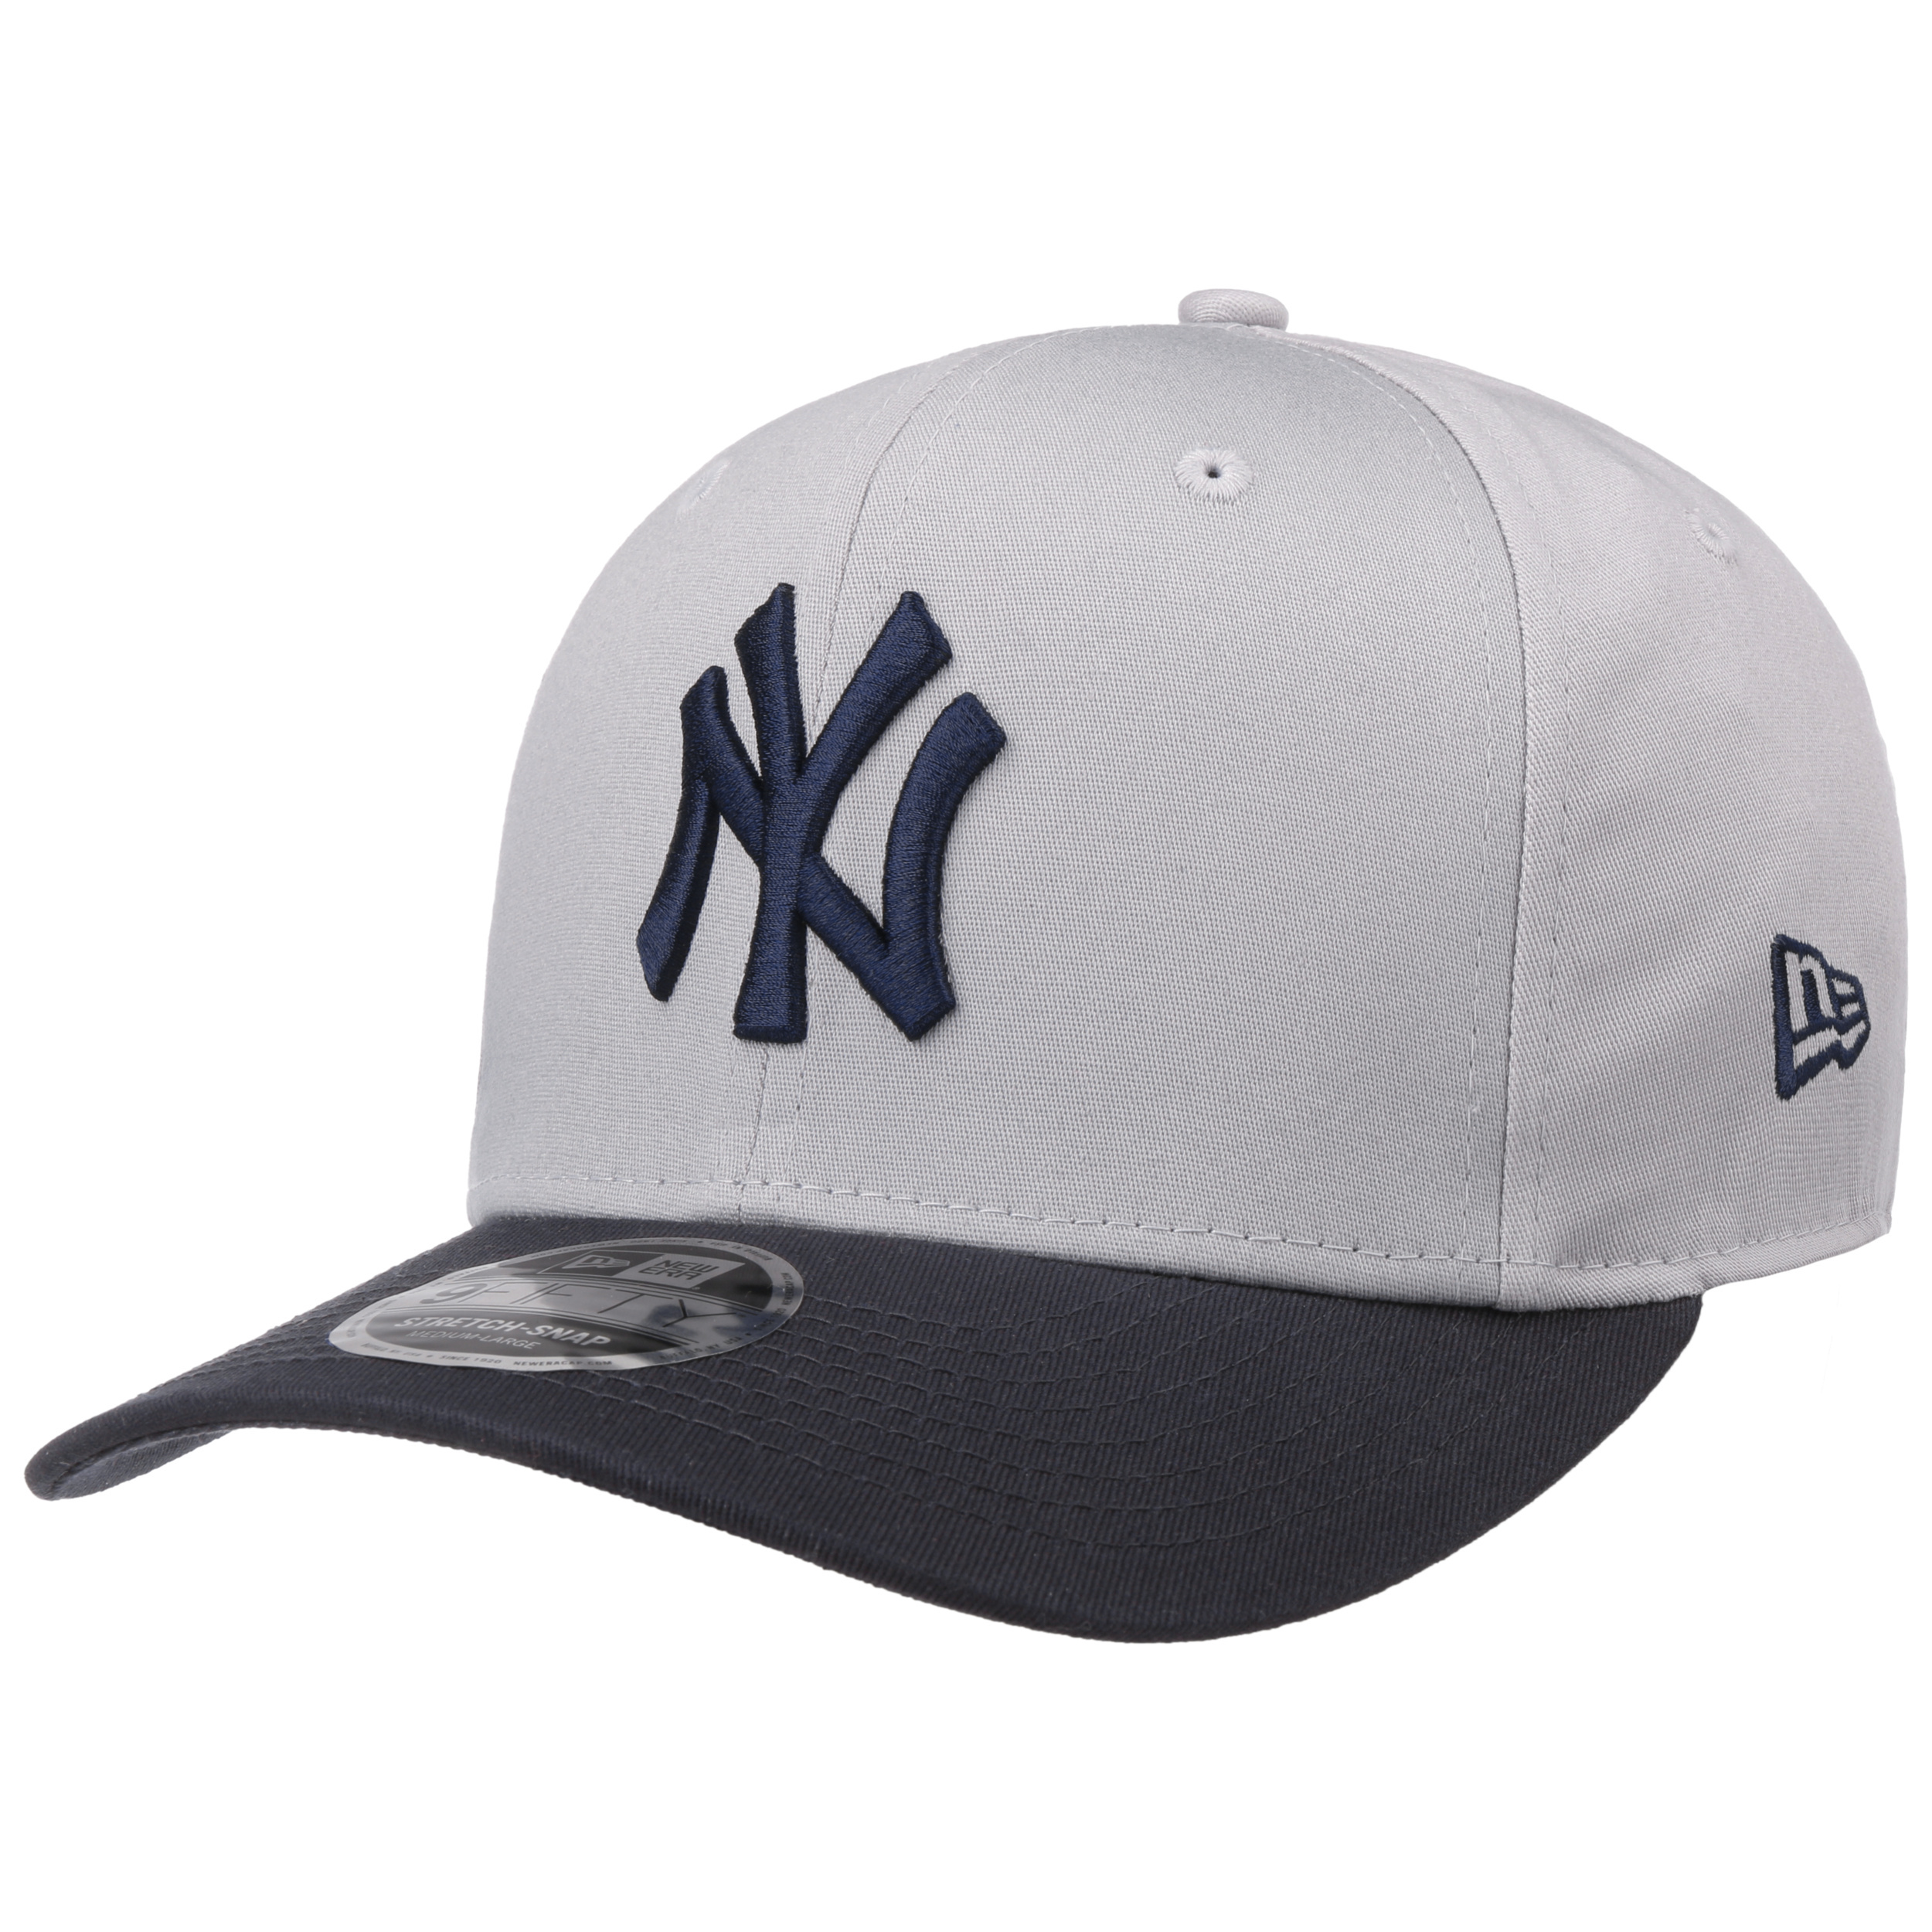 9Fifty New 38,95 Cap York Snap New by Era - € Yankees